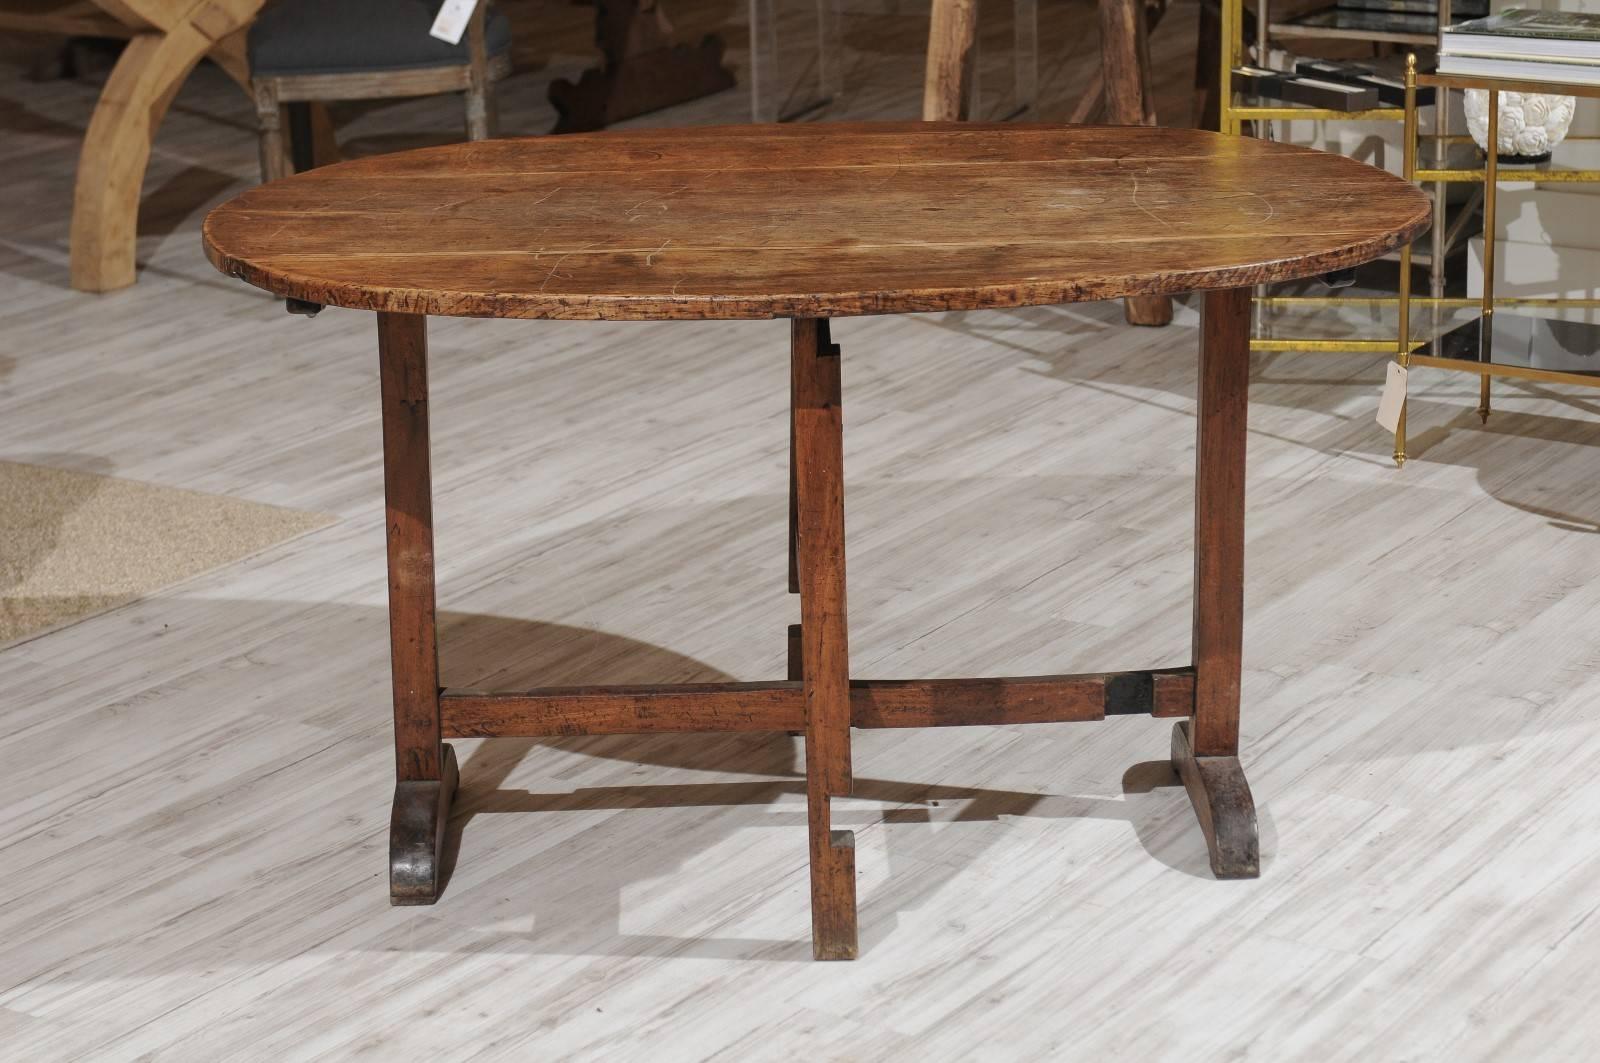 A French oval-shaped tilt-top wine tasting gate leg table from the 19th century. When you're a Francophile like we are, you can't ever have too many wine tasting tables. This one has seen plenty of action over the years and doesn't disappoint with